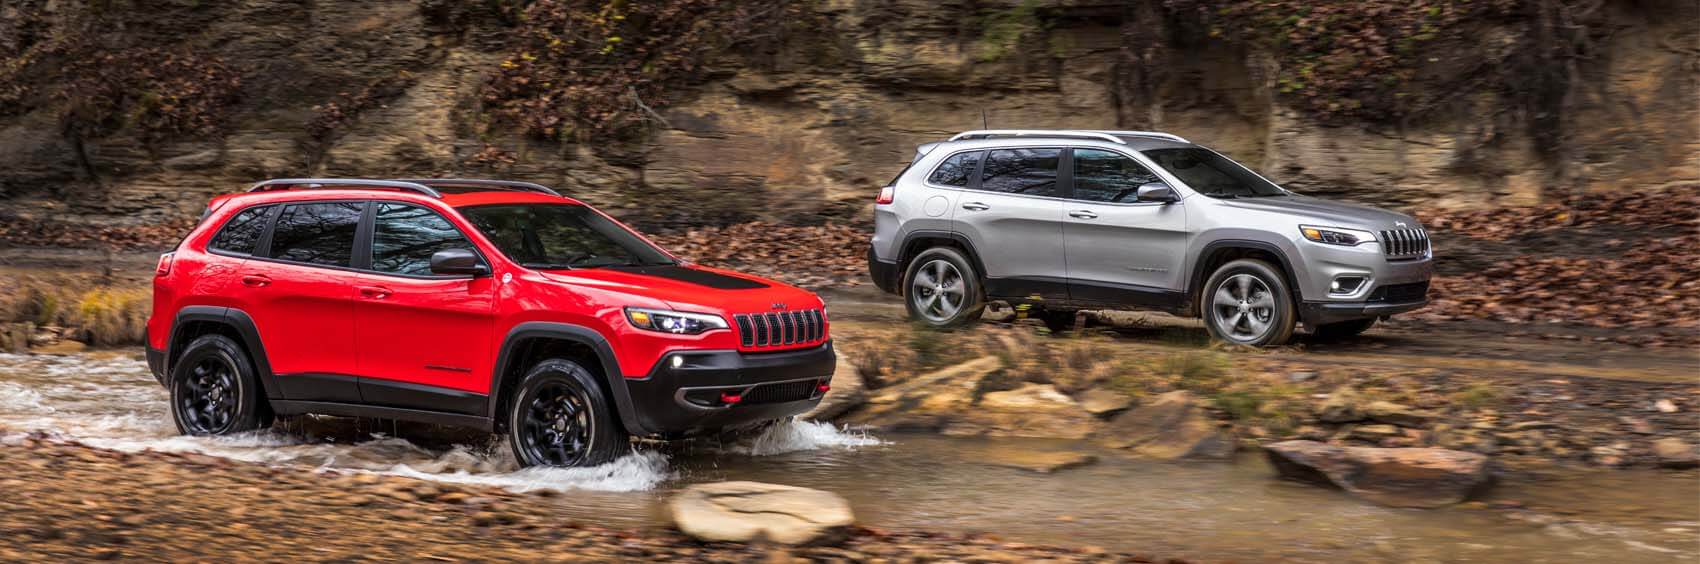 Jeep Cherokee Safety Rating